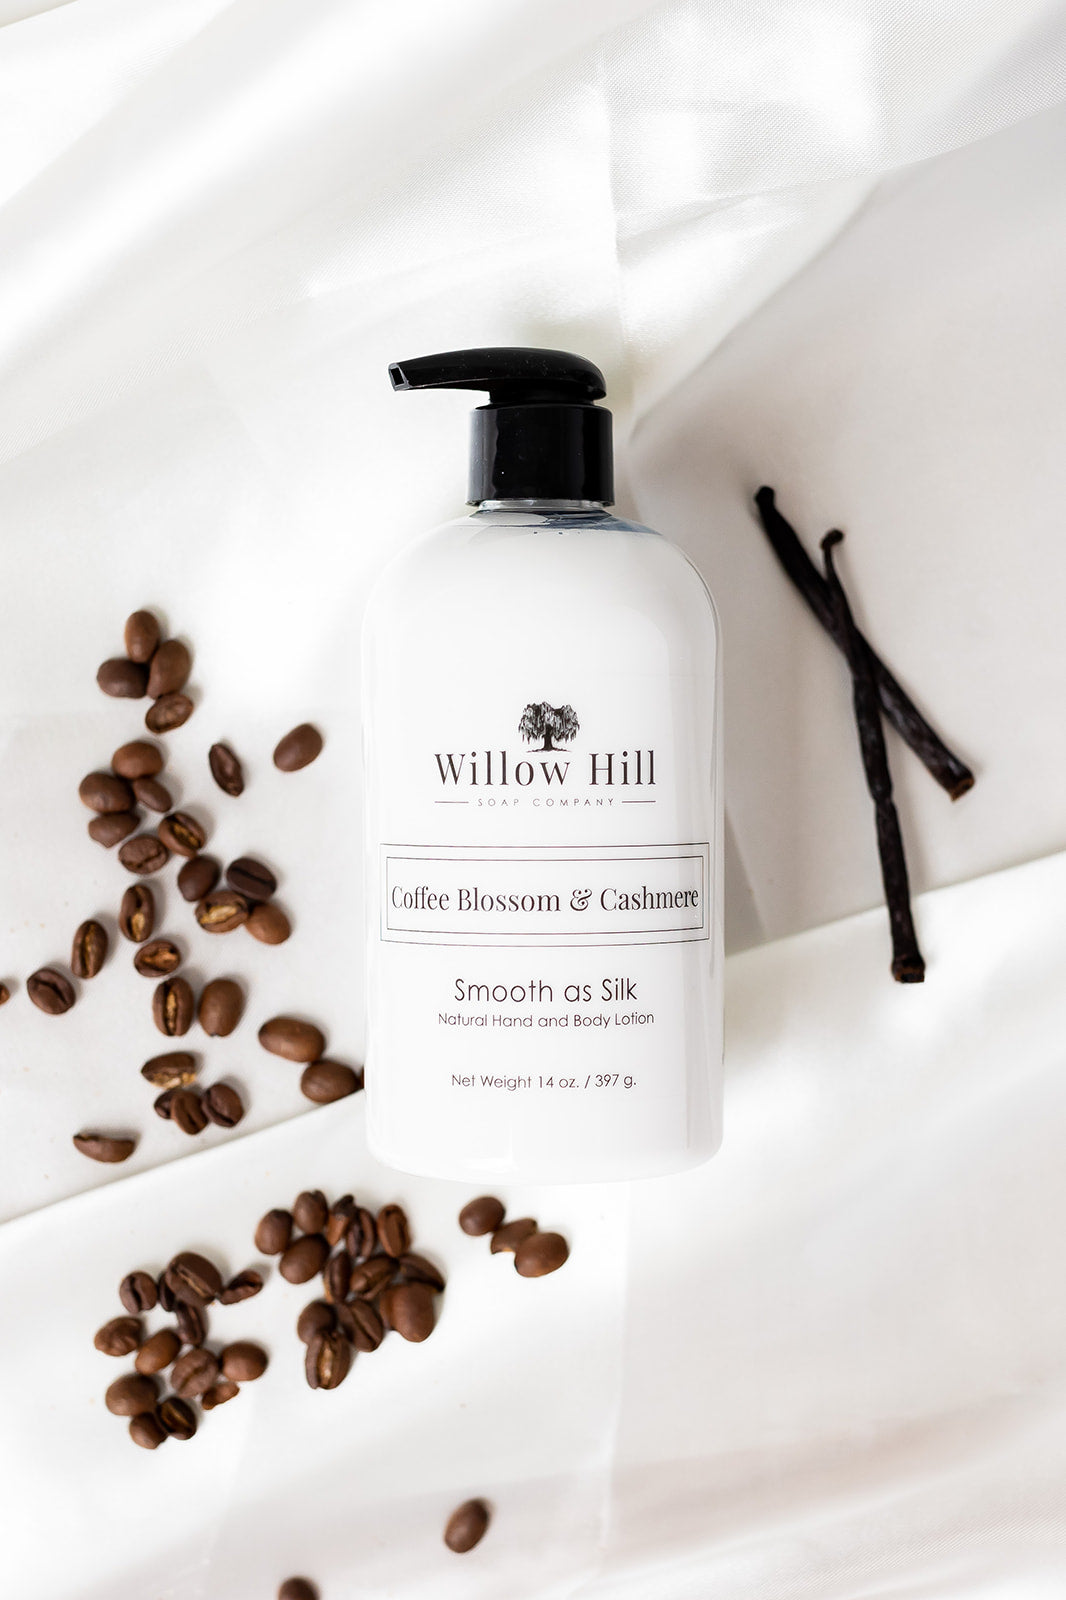 Coffee Blossom & Cashmere Smooth as Silk Lotion